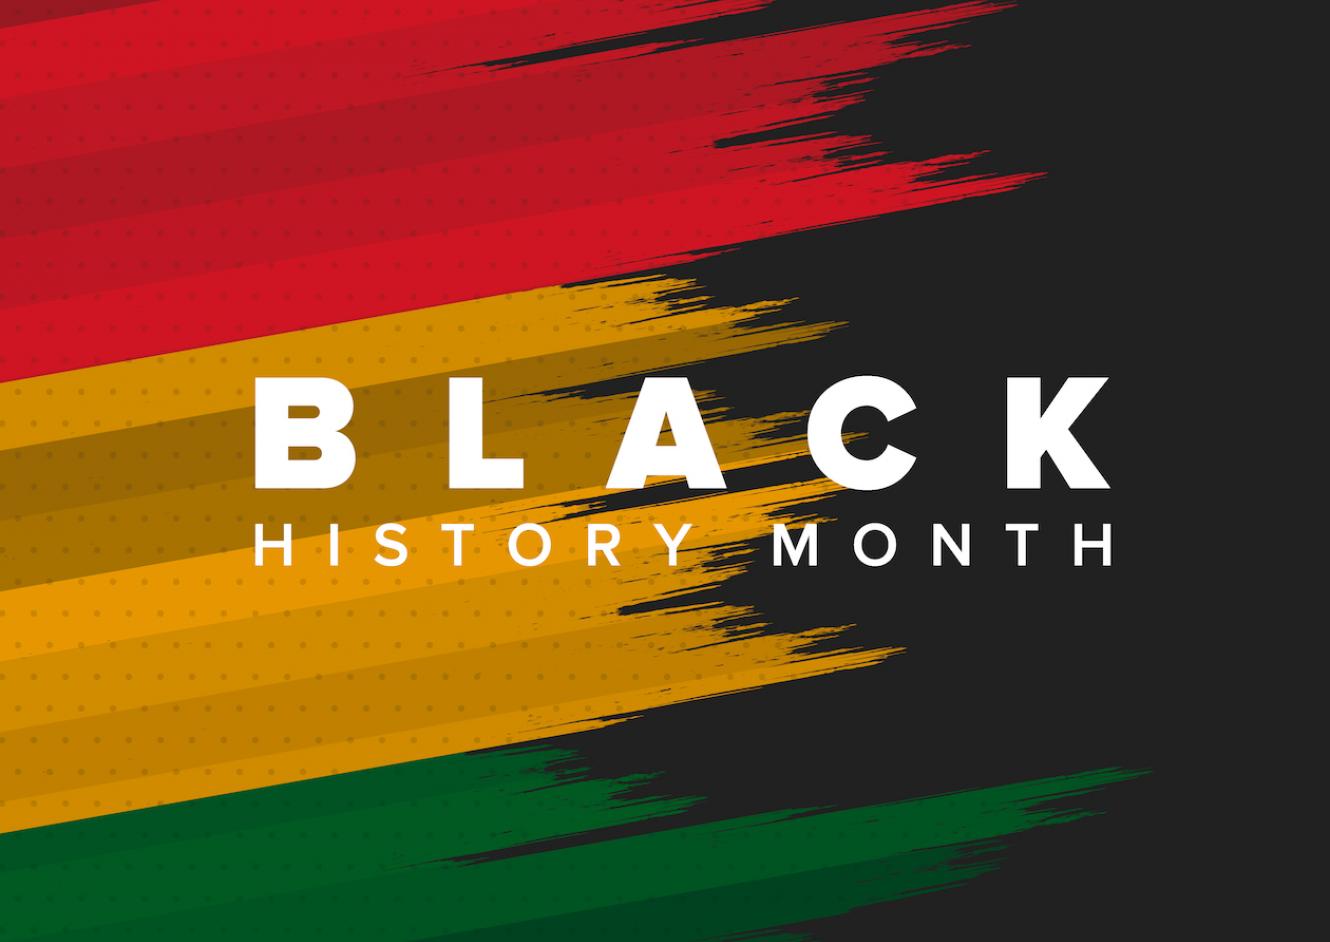 Celebrate Black History Month with these engagement and learning opportunities UW Combined